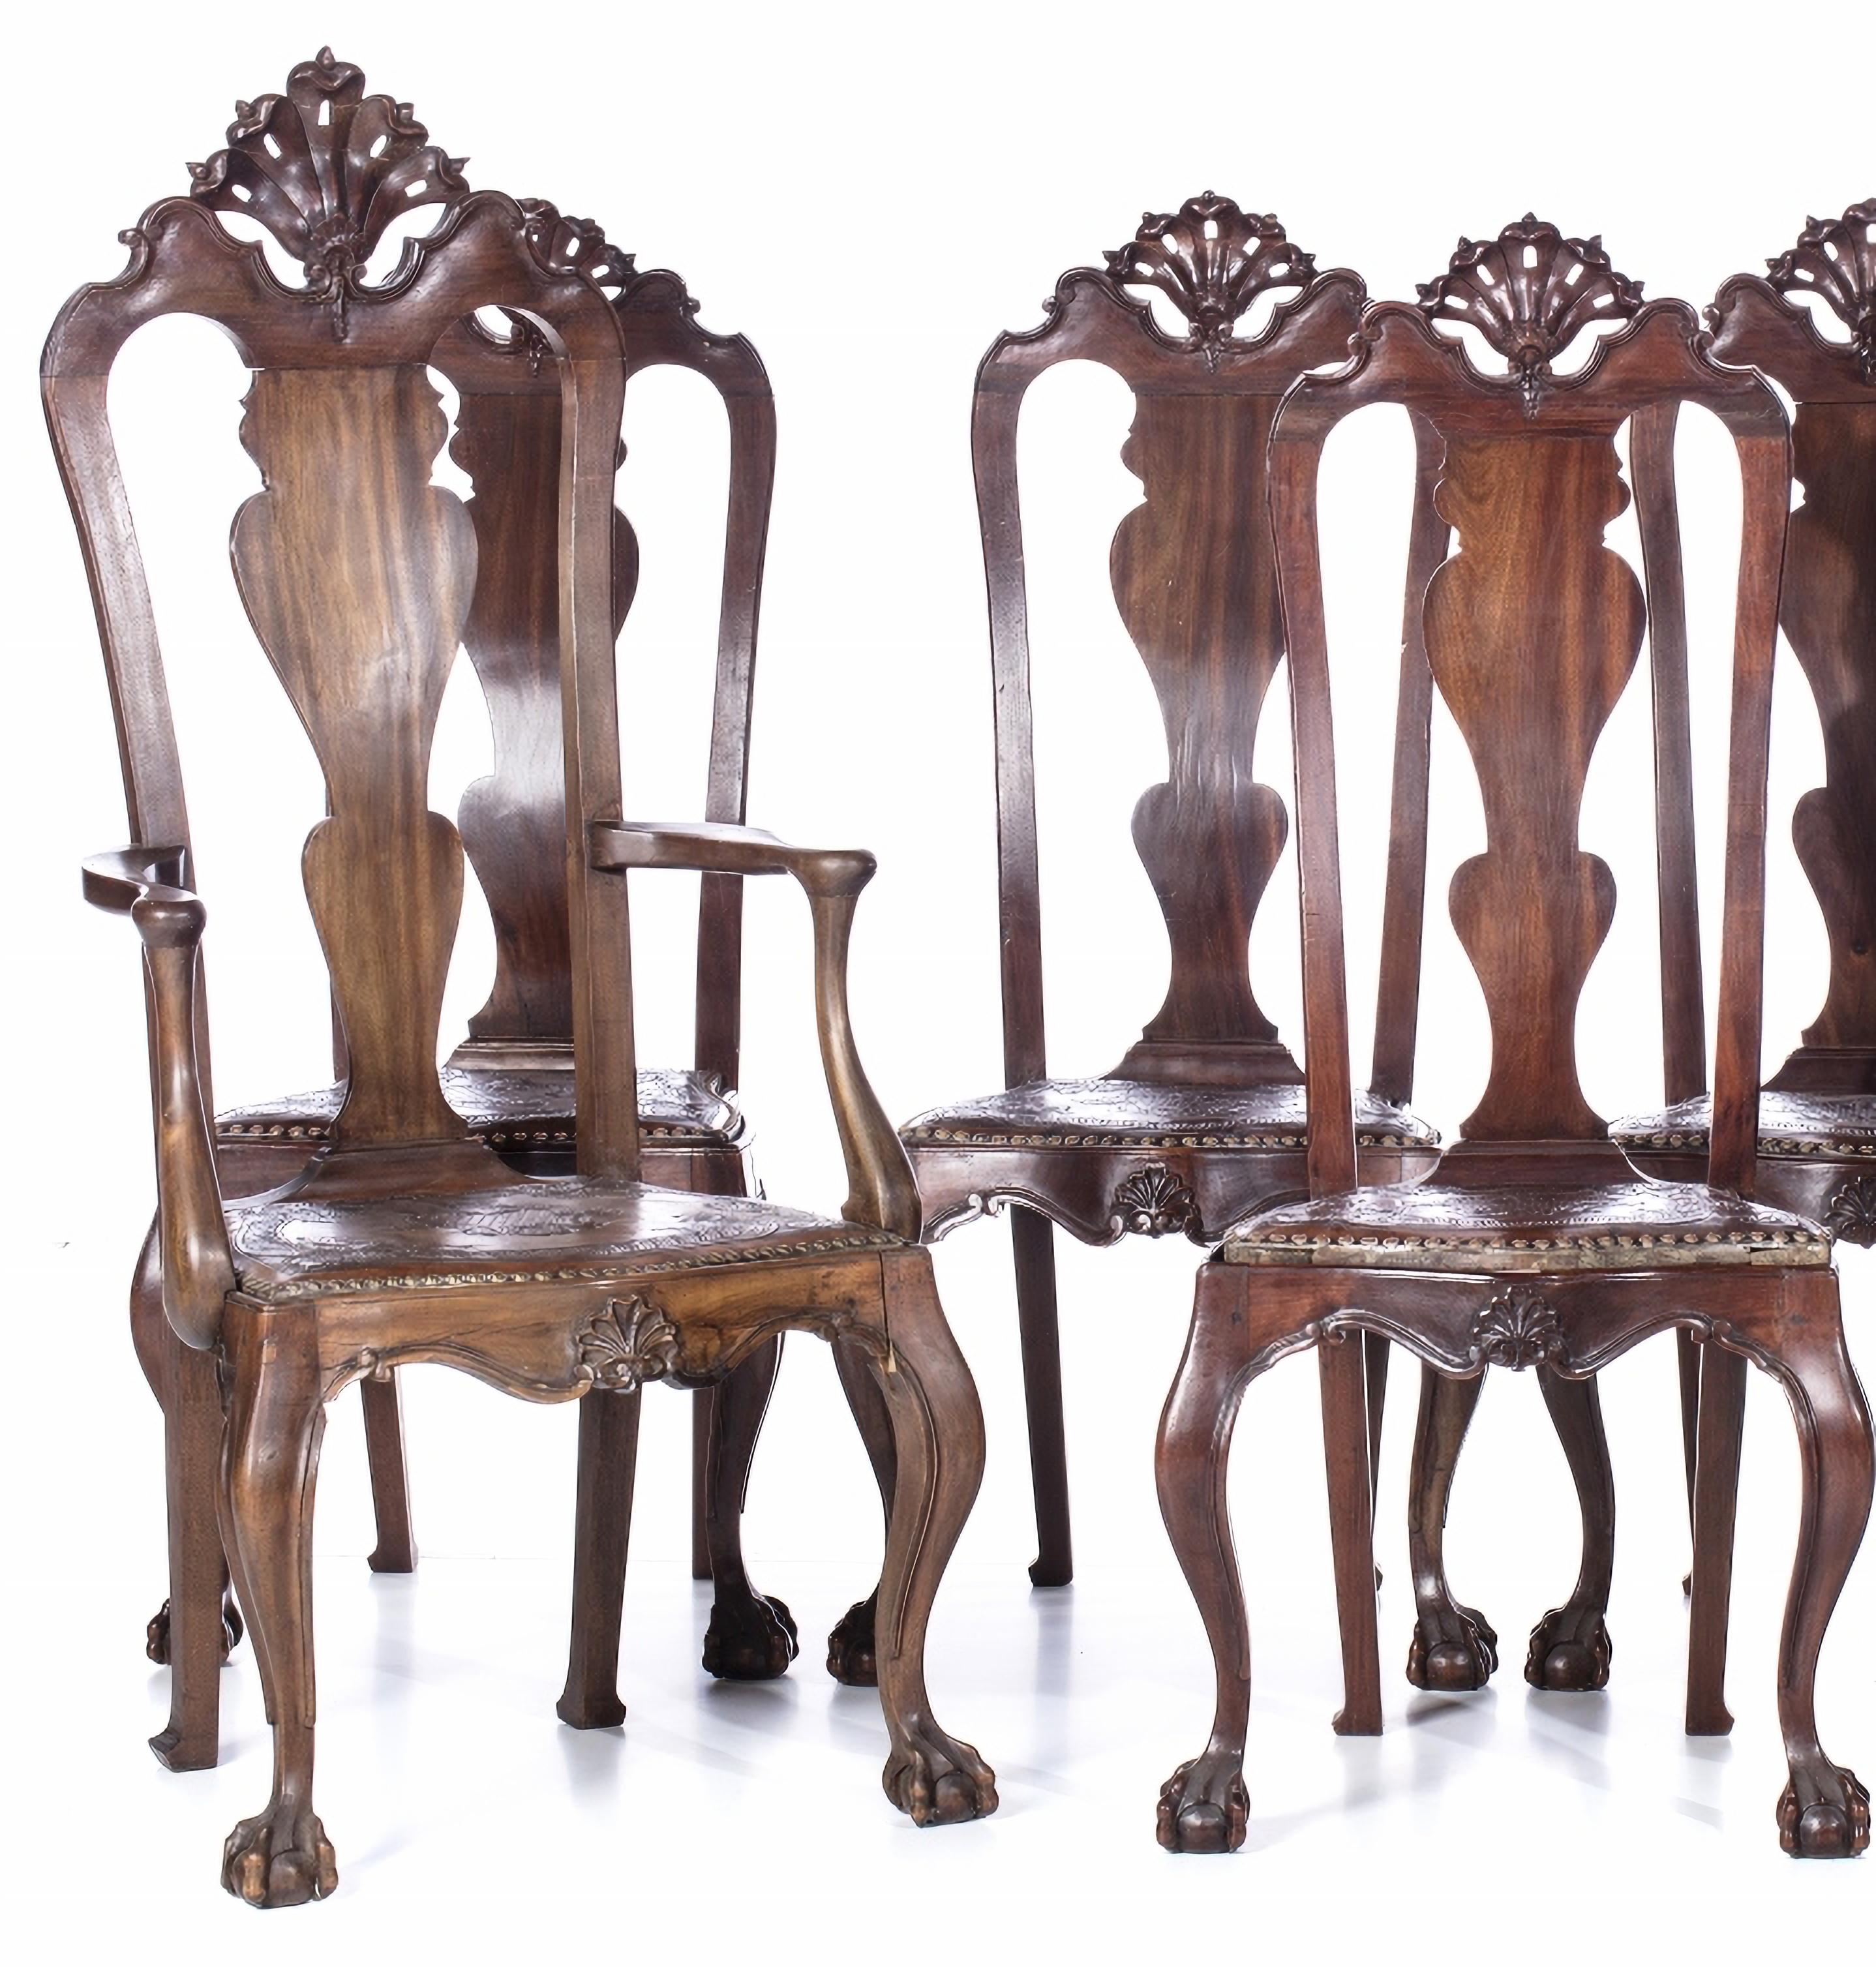 Five chairs and two armchairs
Portuguese of the 18th century
in carved wood, hollow back, seats in carved leather with studs.
Small defects.
Dim.: (larger) 133 x 64 x 44 cm.

THE PRICE IS FOR THE SET